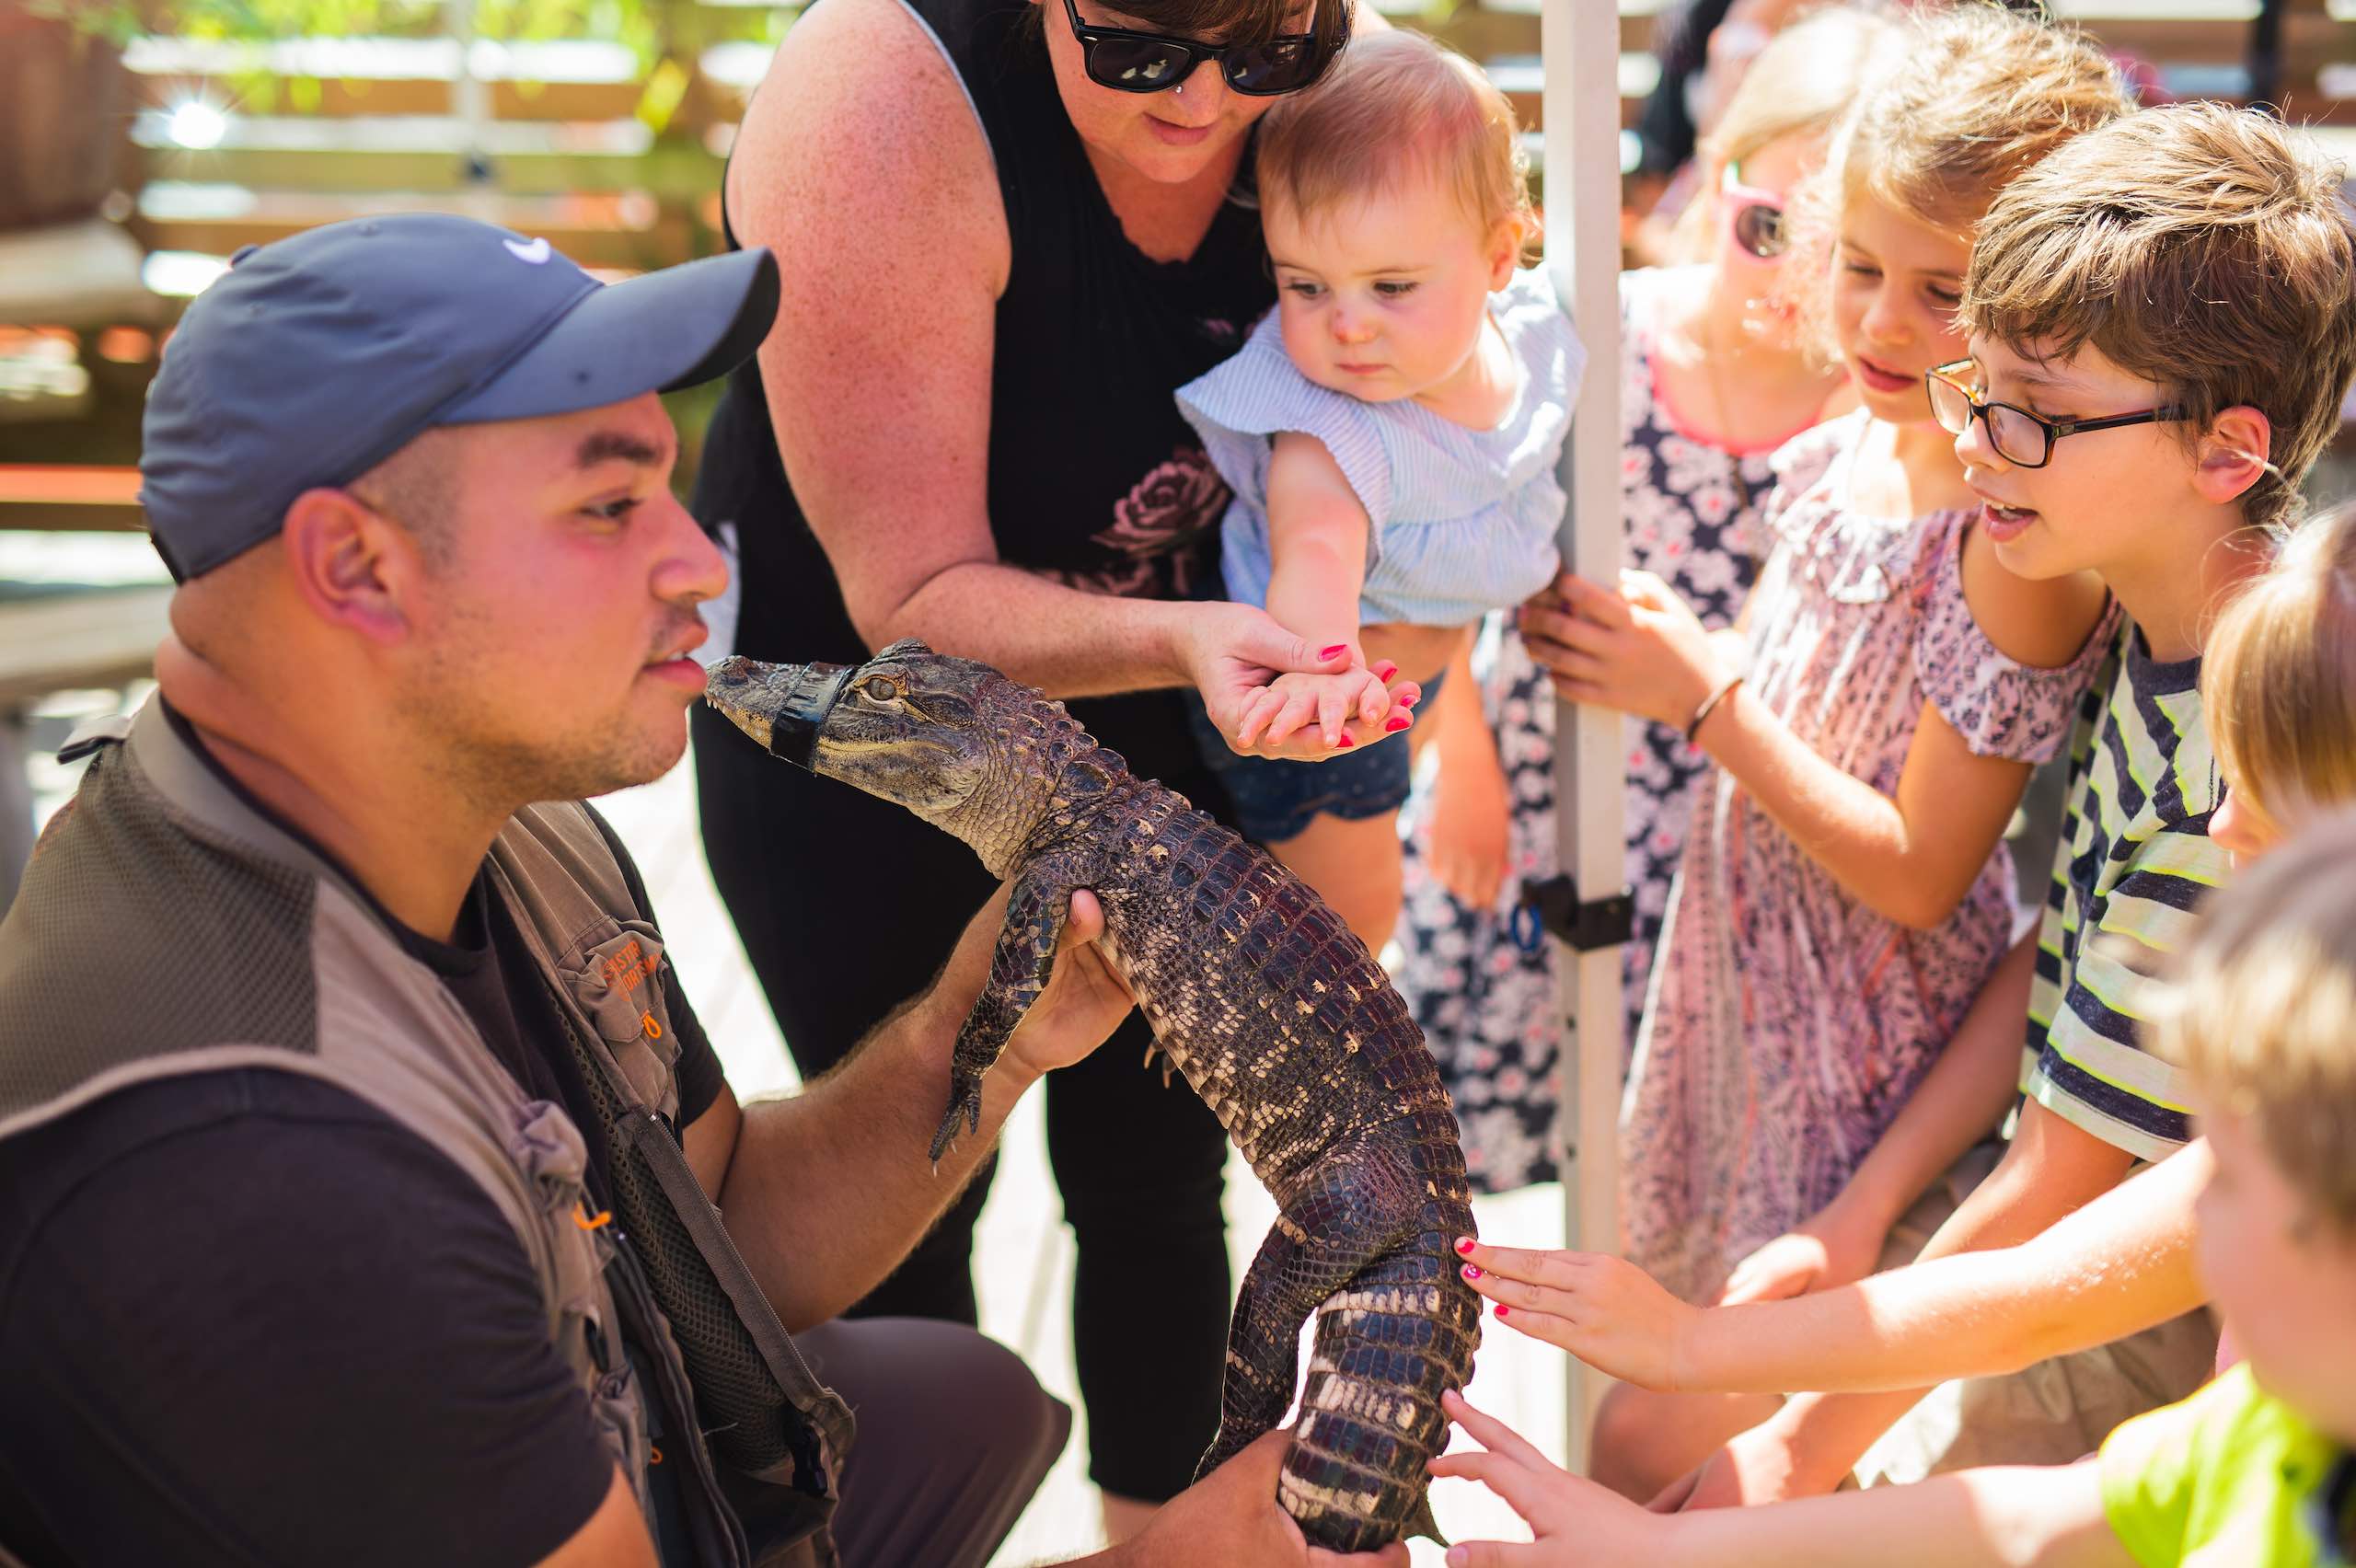 Everglades Holiday Park Social Media Marketing with man wearing blue cap holding small alligator showing it to children